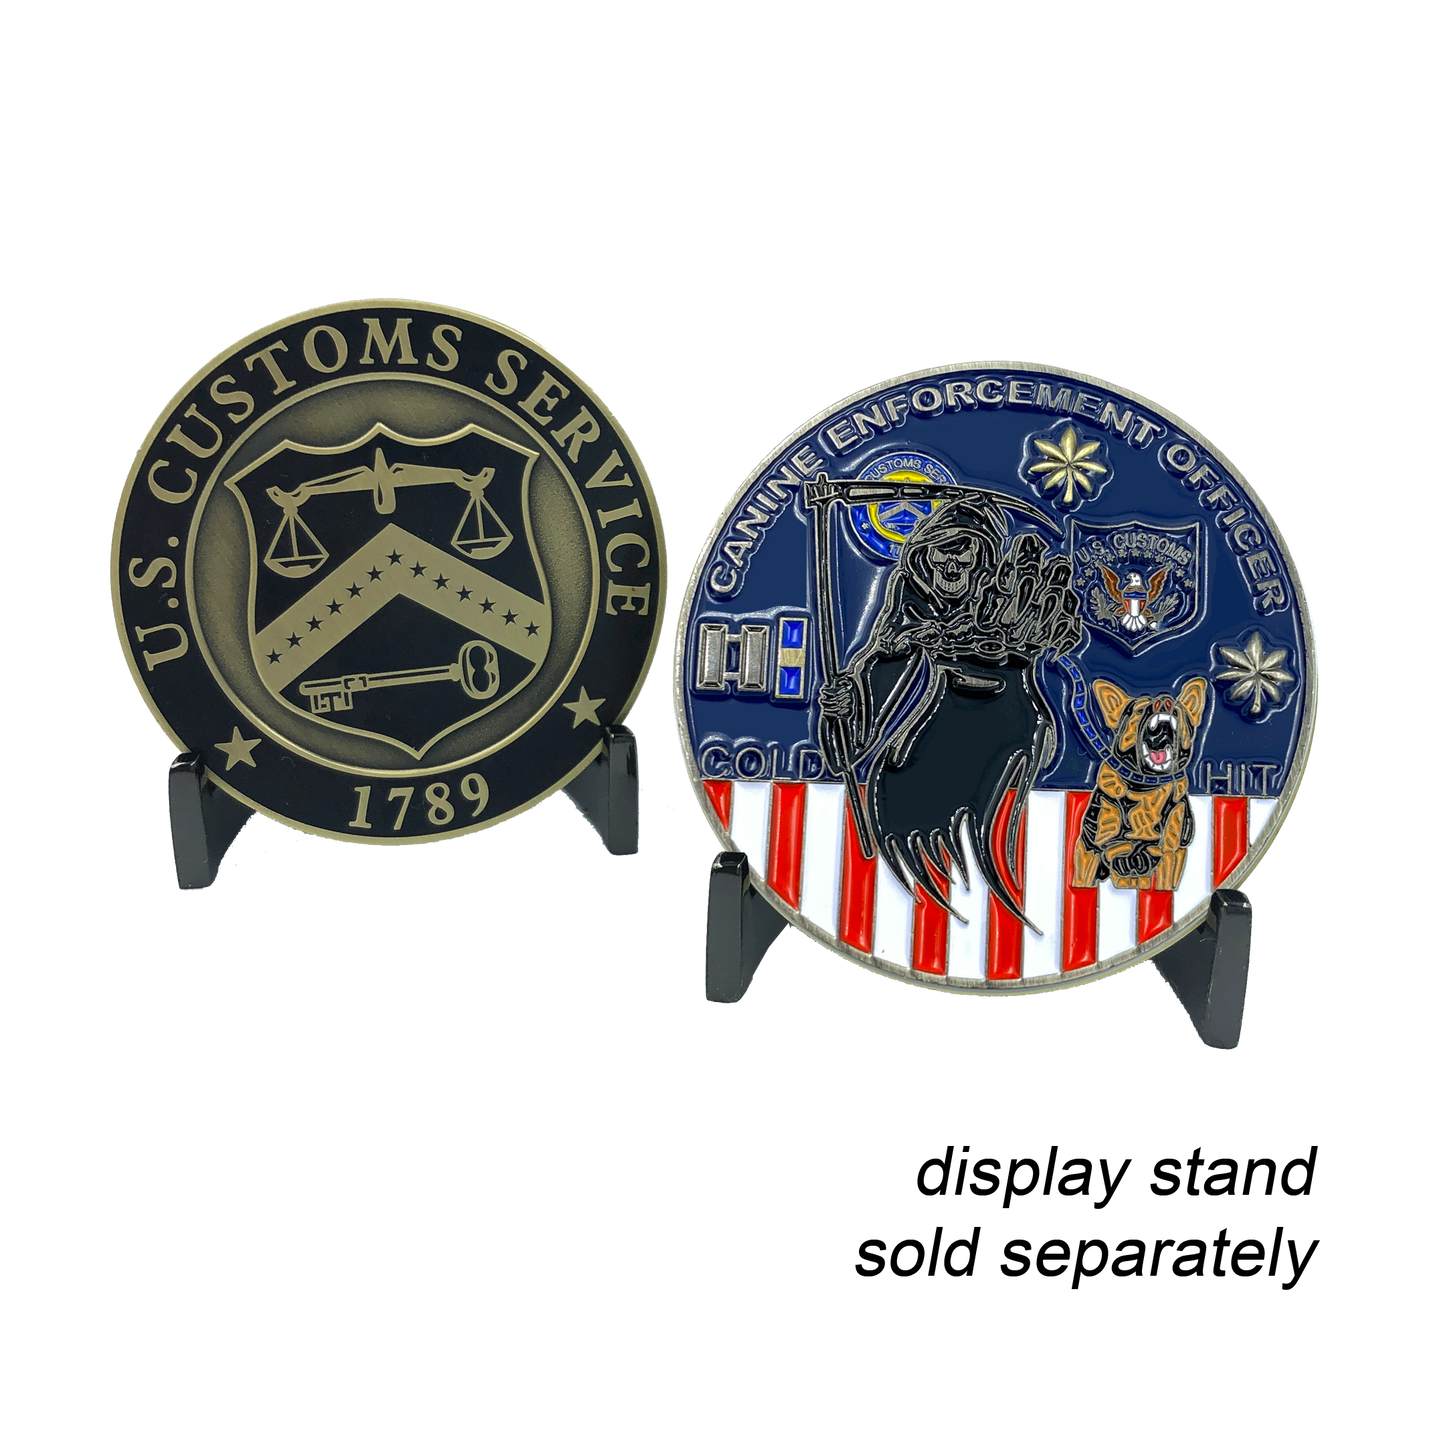 discontinued BB-010 Legacy US Customs Service Canine Enforcement Officer Treasury Department Inspector K9 Challenge Coin